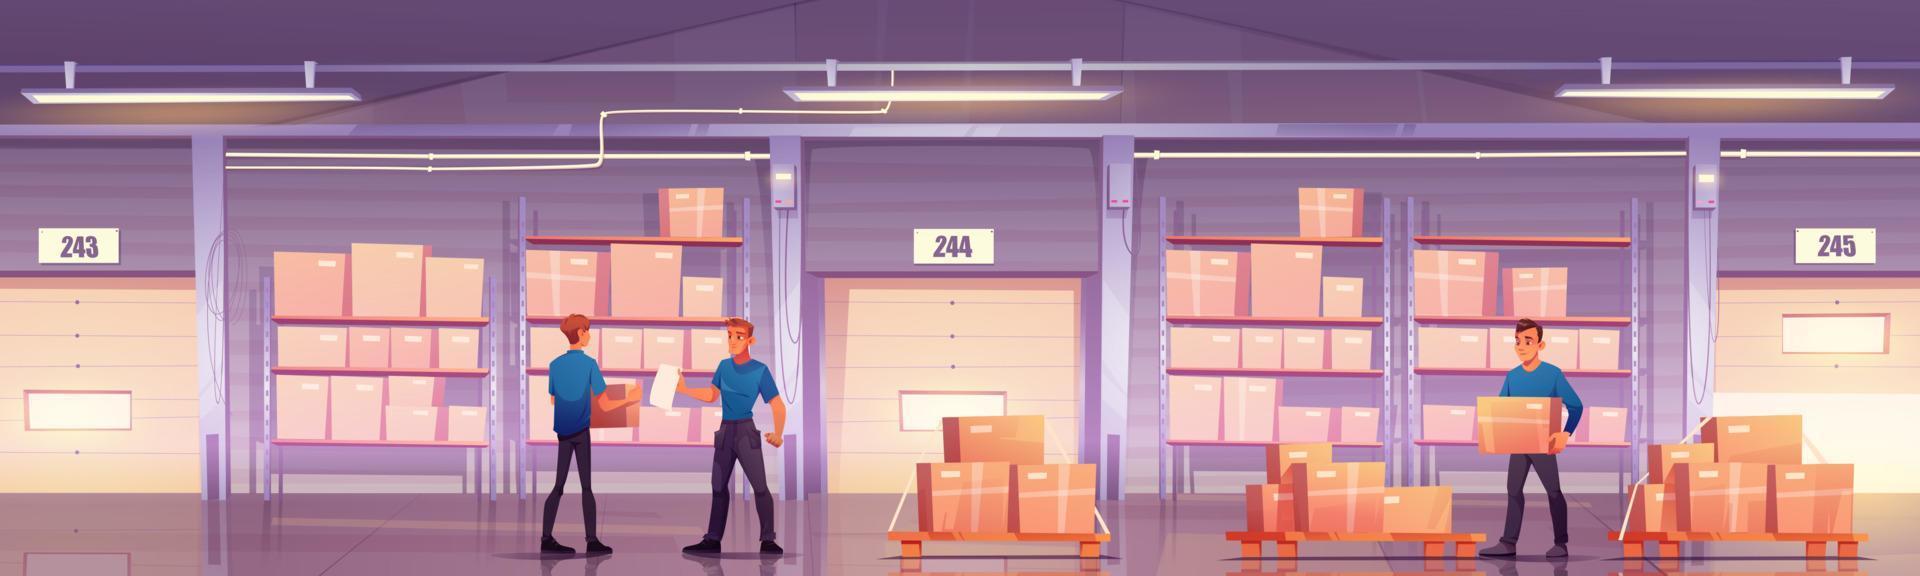 Warehouse with workers, cardboard boxes on shelves vector